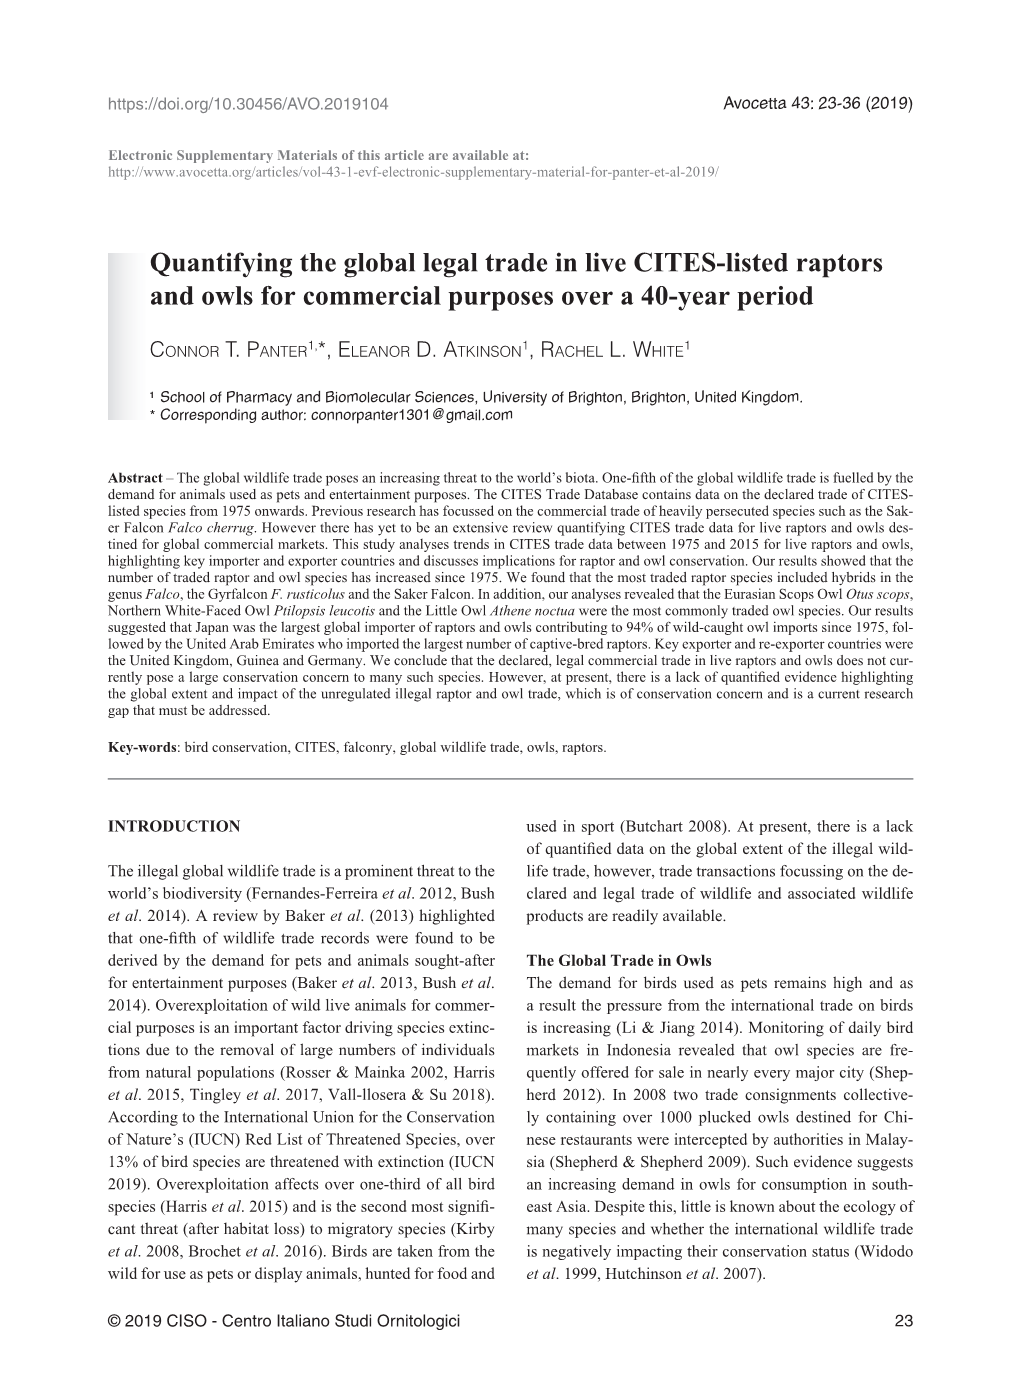 Quantifying the Global Legal Trade in Live CITES-Listed Raptors and Owls for Commercial Purposes Over a 40-Year Period